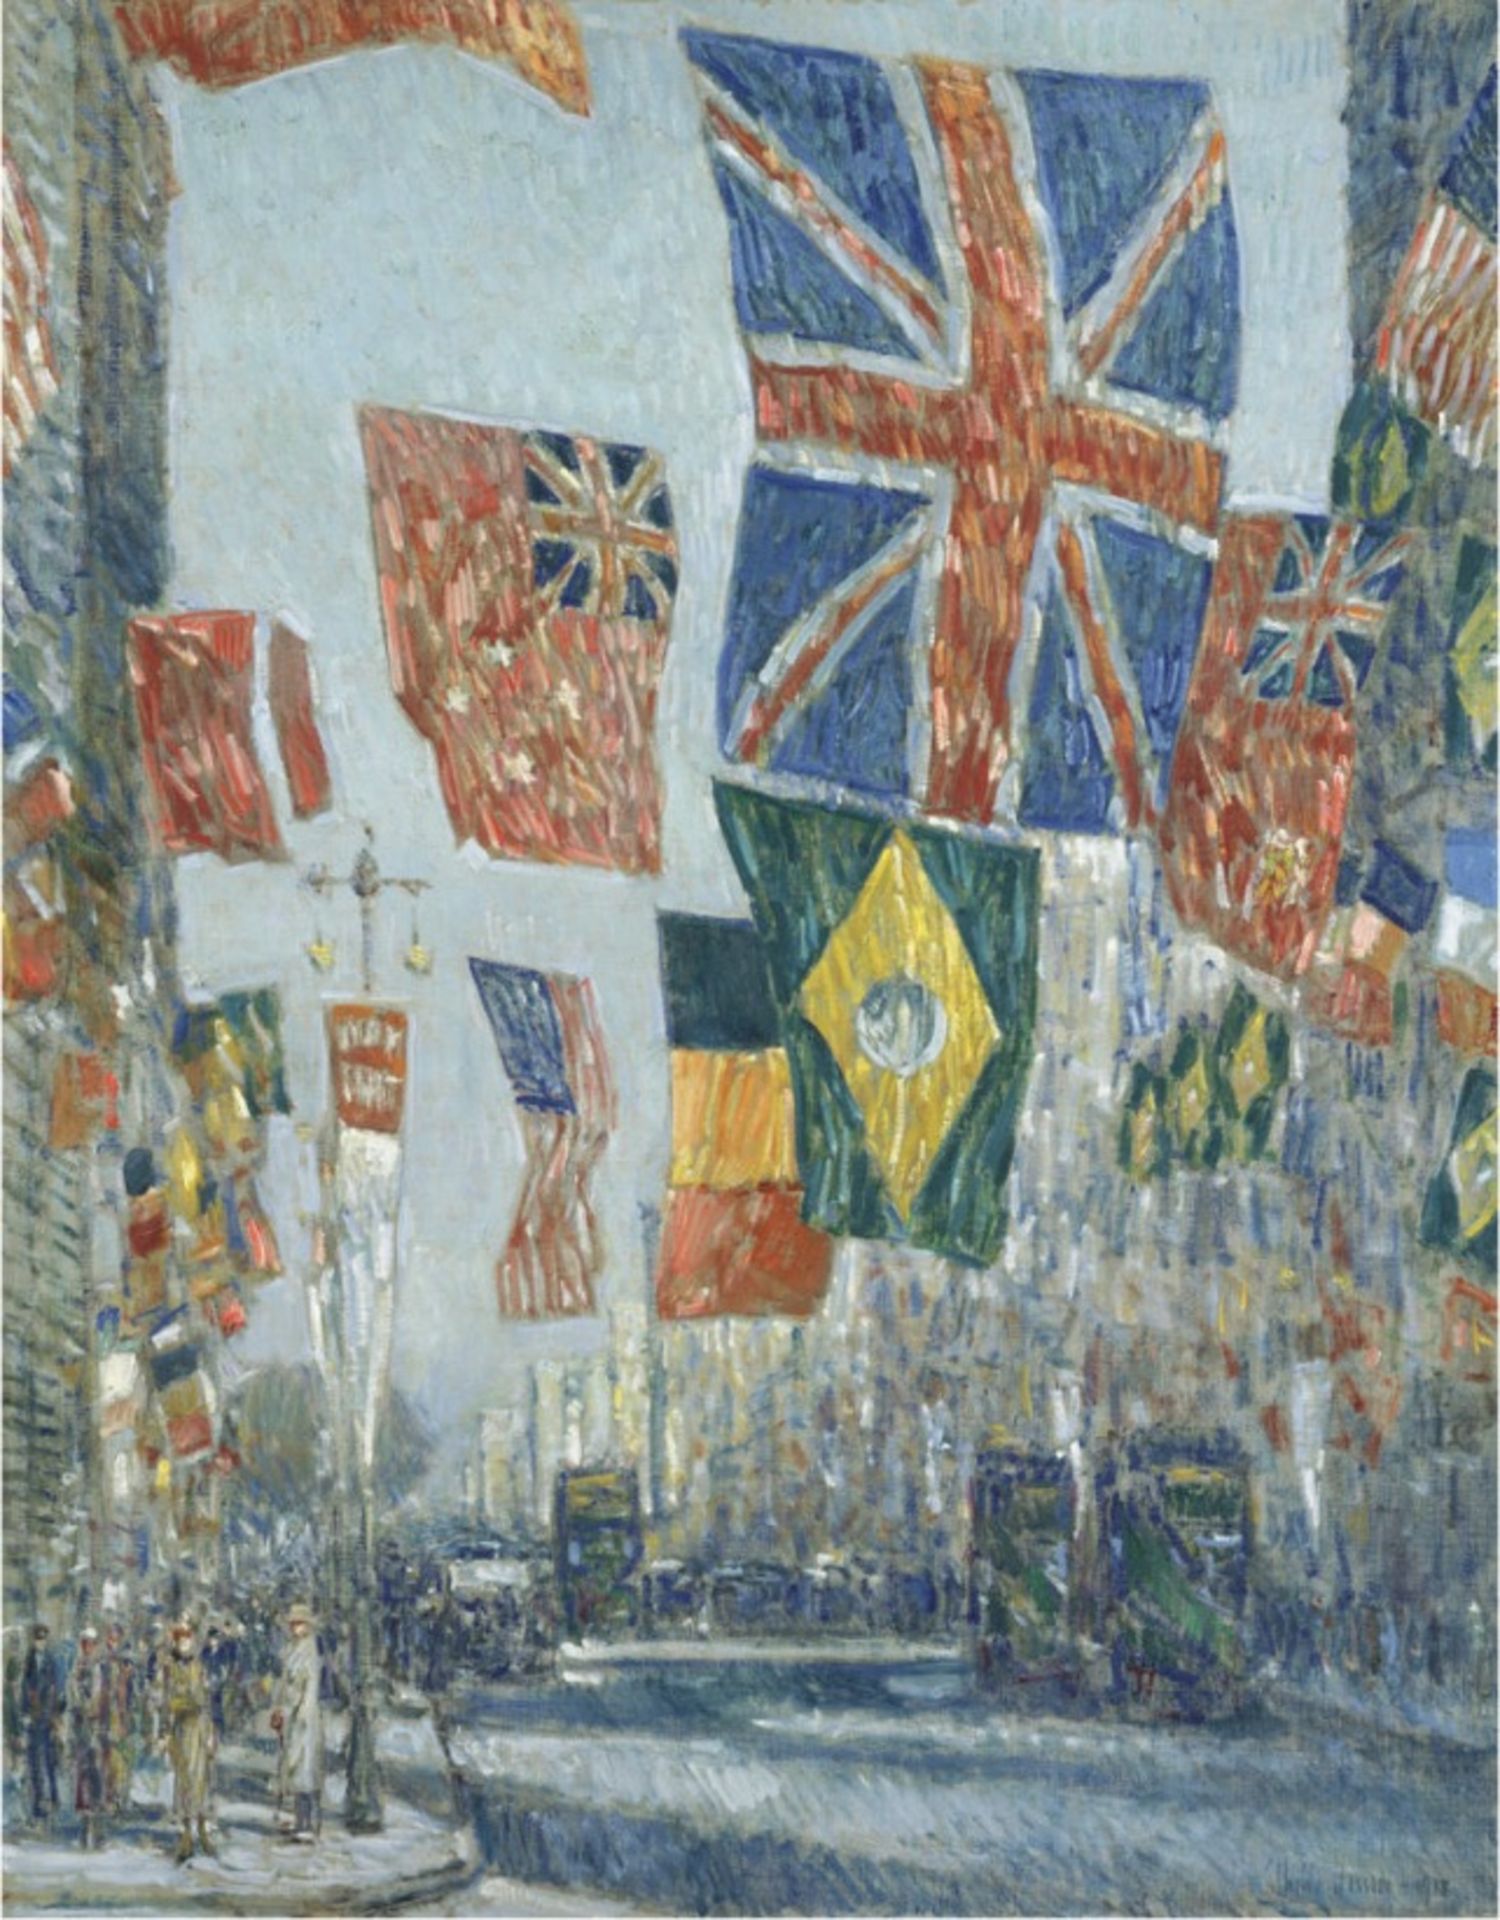 Childe Hassam "Avenue of the Allies, Great Britain, 1918" Offset Lithograph